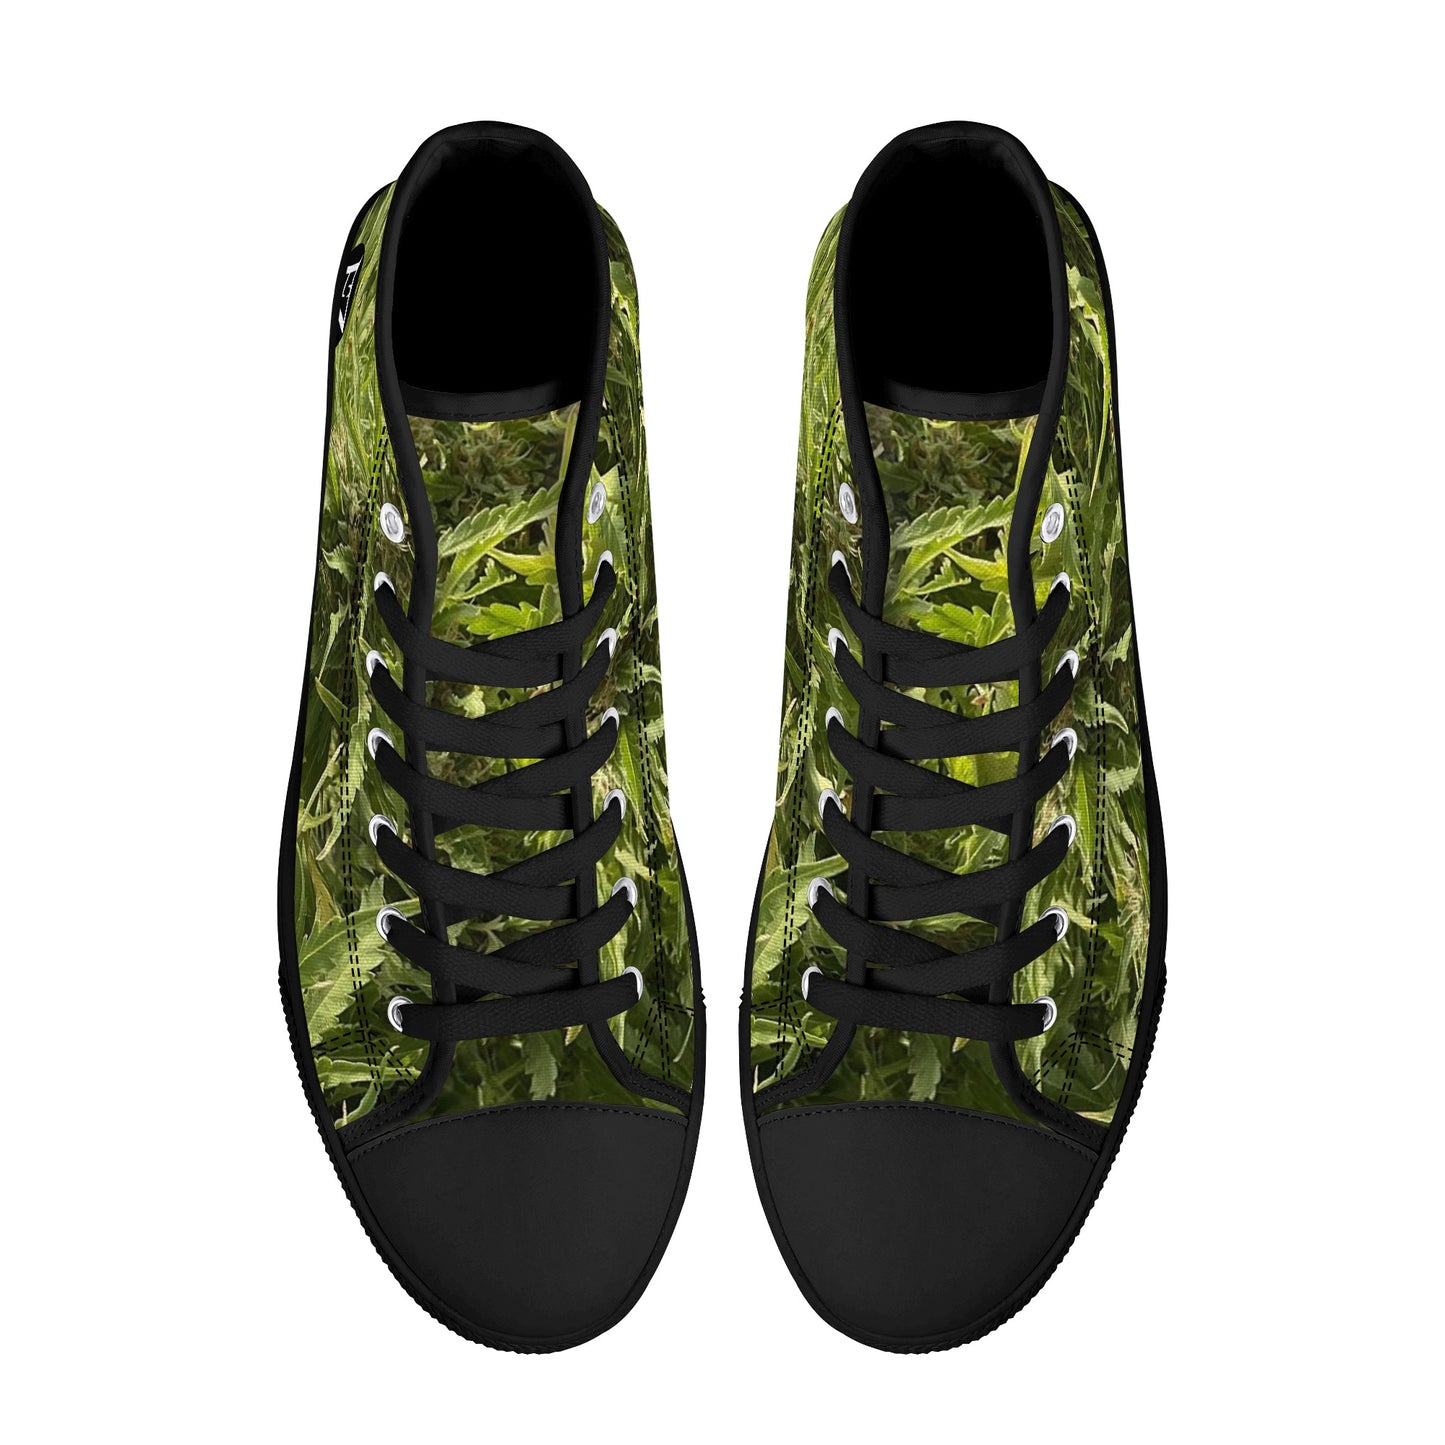 FZ Men's High Top Weed Canvas Shoes - FZwear